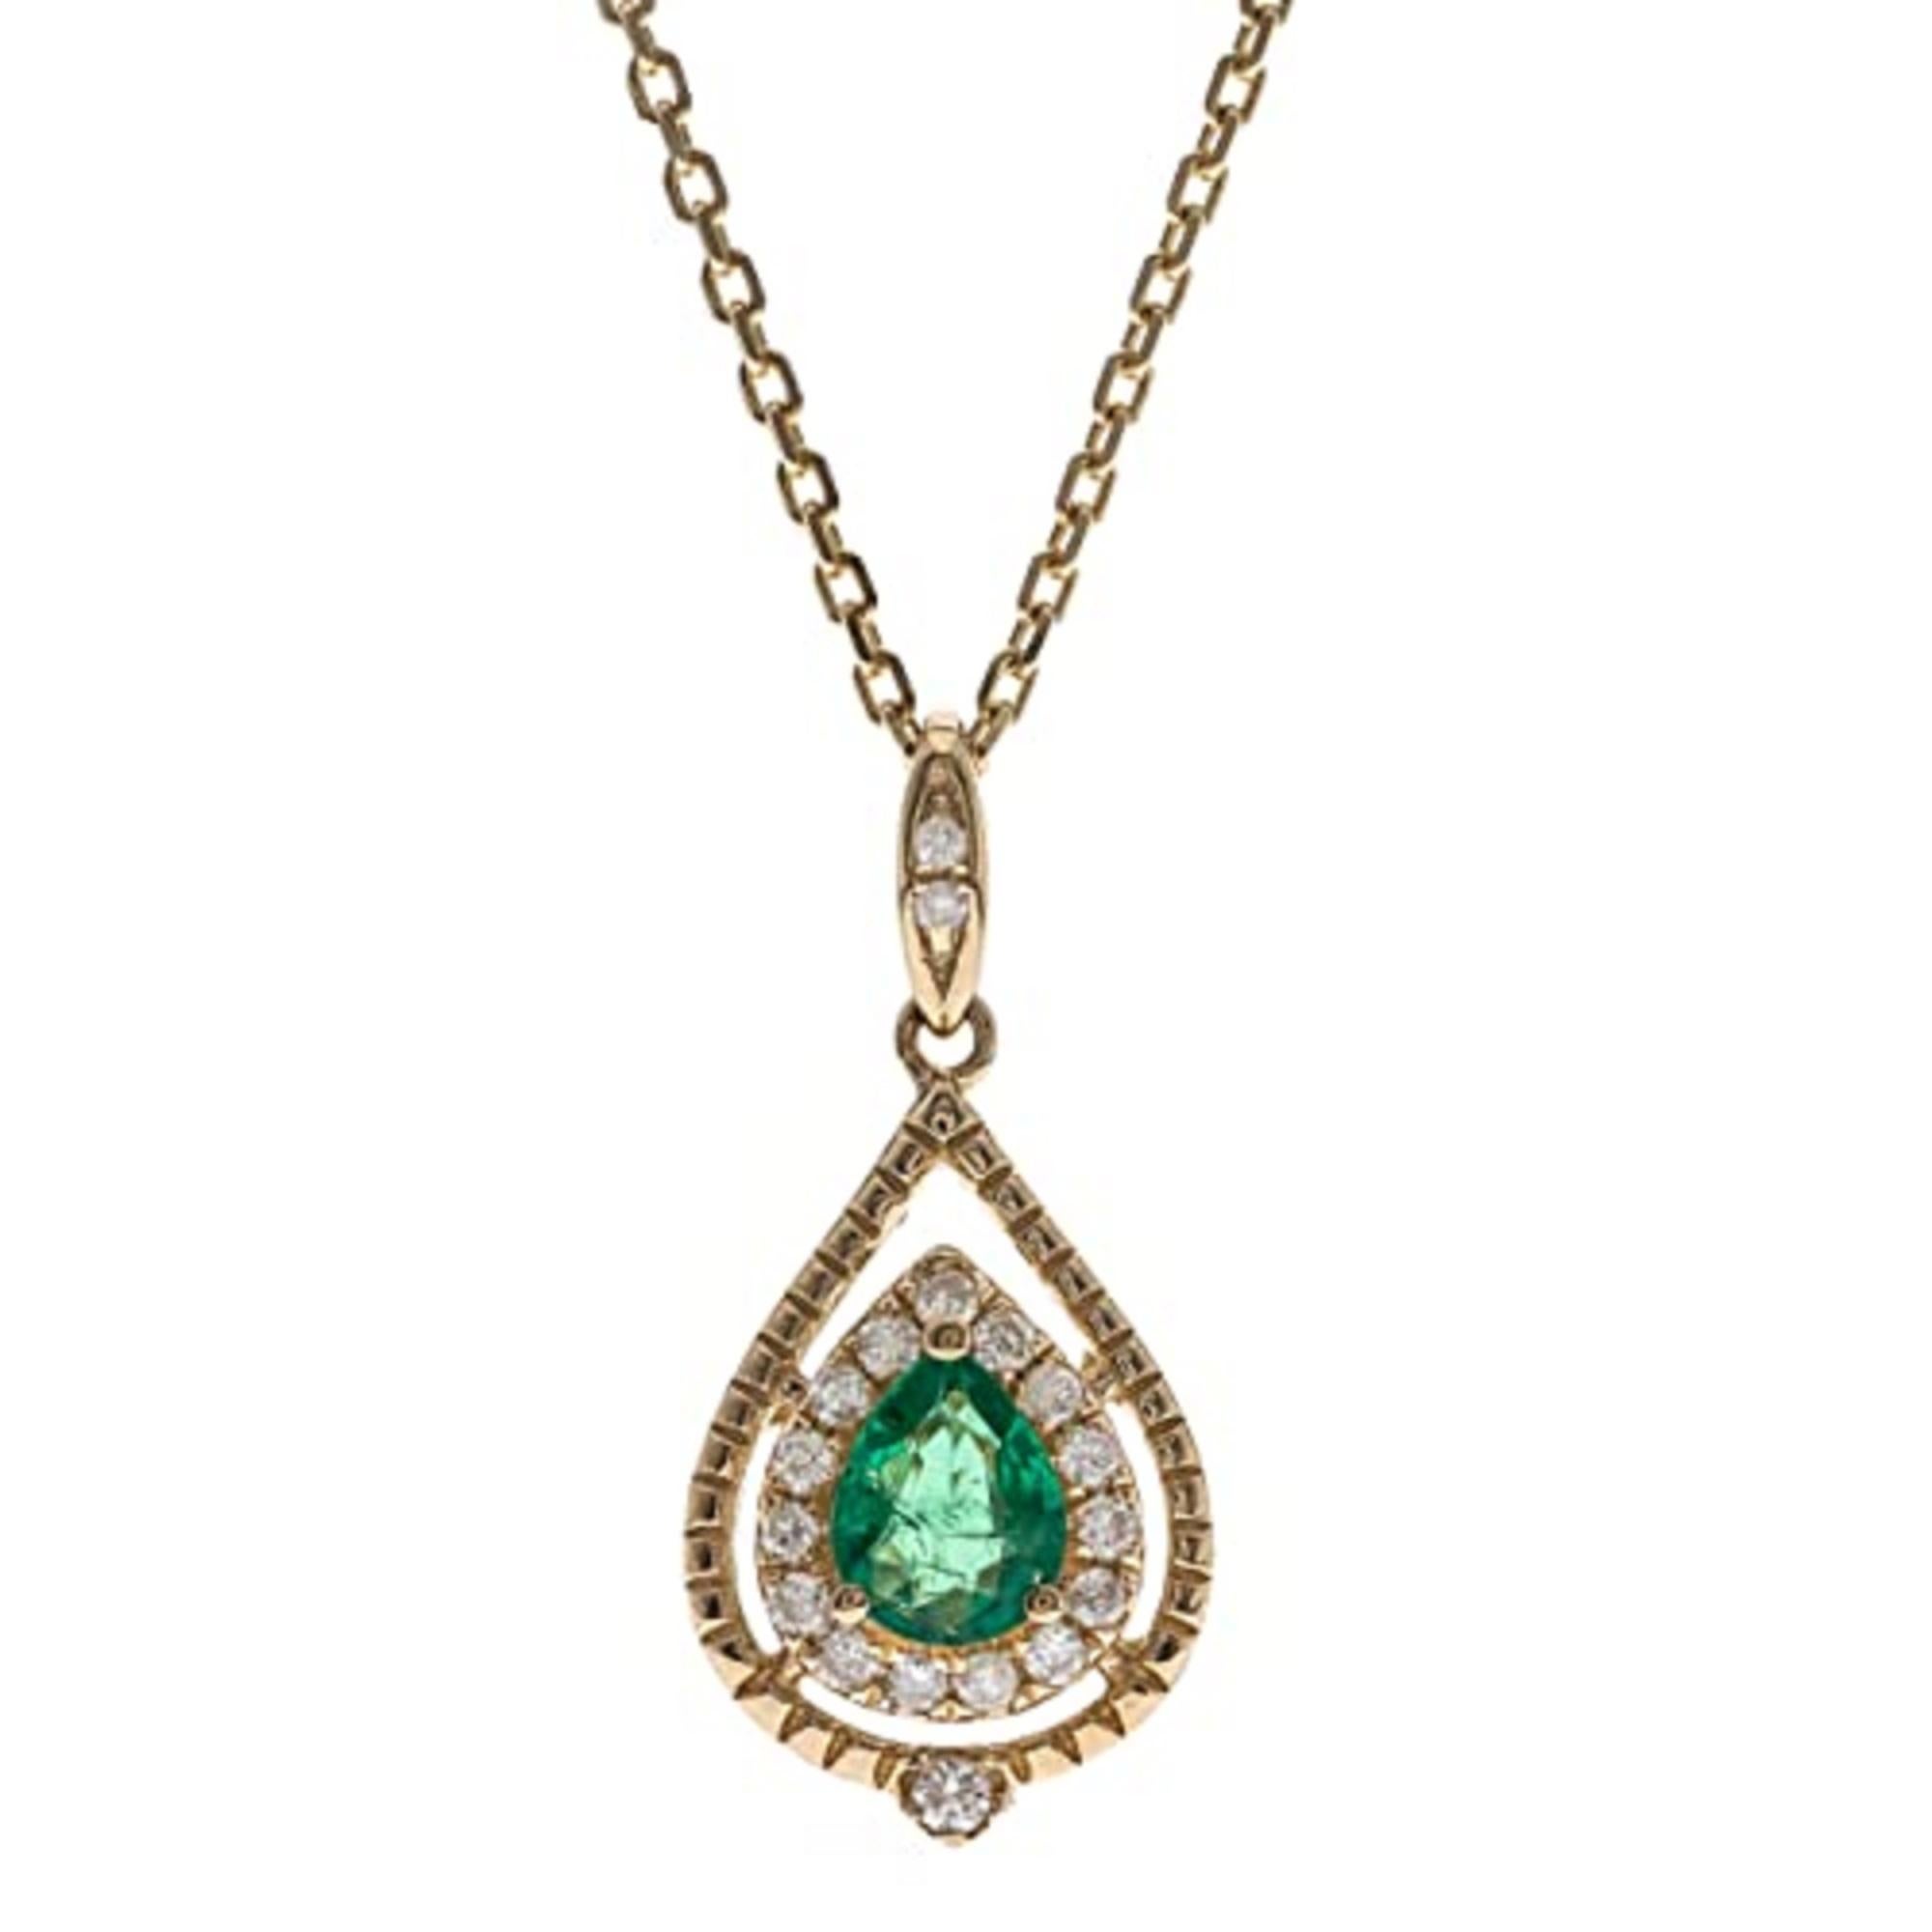 Decorate yourself in elegance with this Pendant is crafted from 14-karat Yellow Gold by Gin & Grace Pendant. This Pendant is made up of 4*5 Pear-cut Prong setting Emerald (1 Pcs) 0.26 Carat and Round-Cut White Diamond (20 Pcs) 0.26 Carat. This